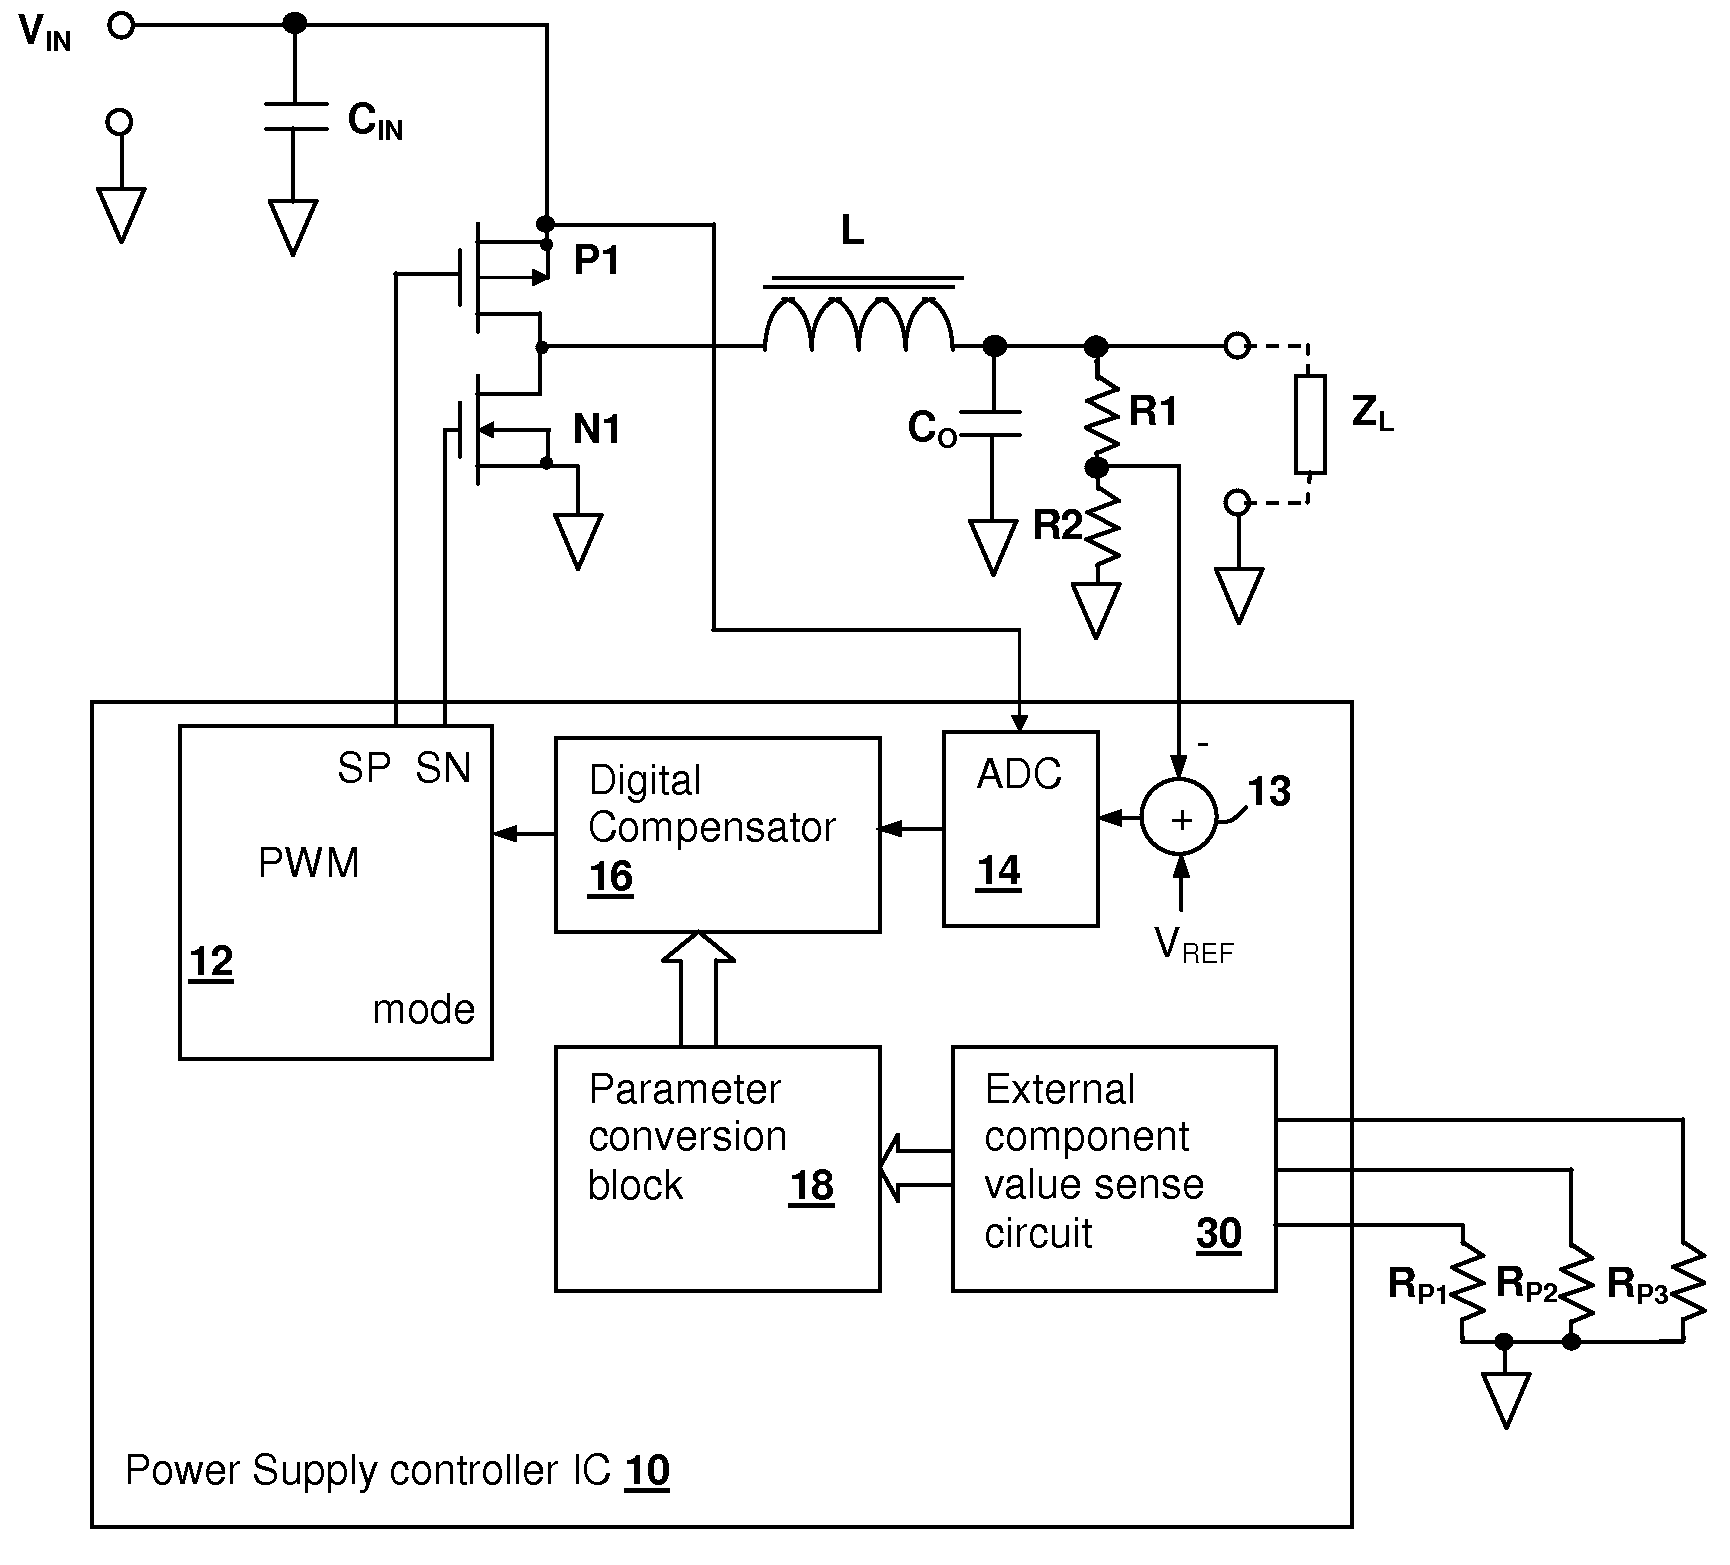 Switch-mode power supply (SMPS) controller integrated circuit determining operating characteristics from filter component information